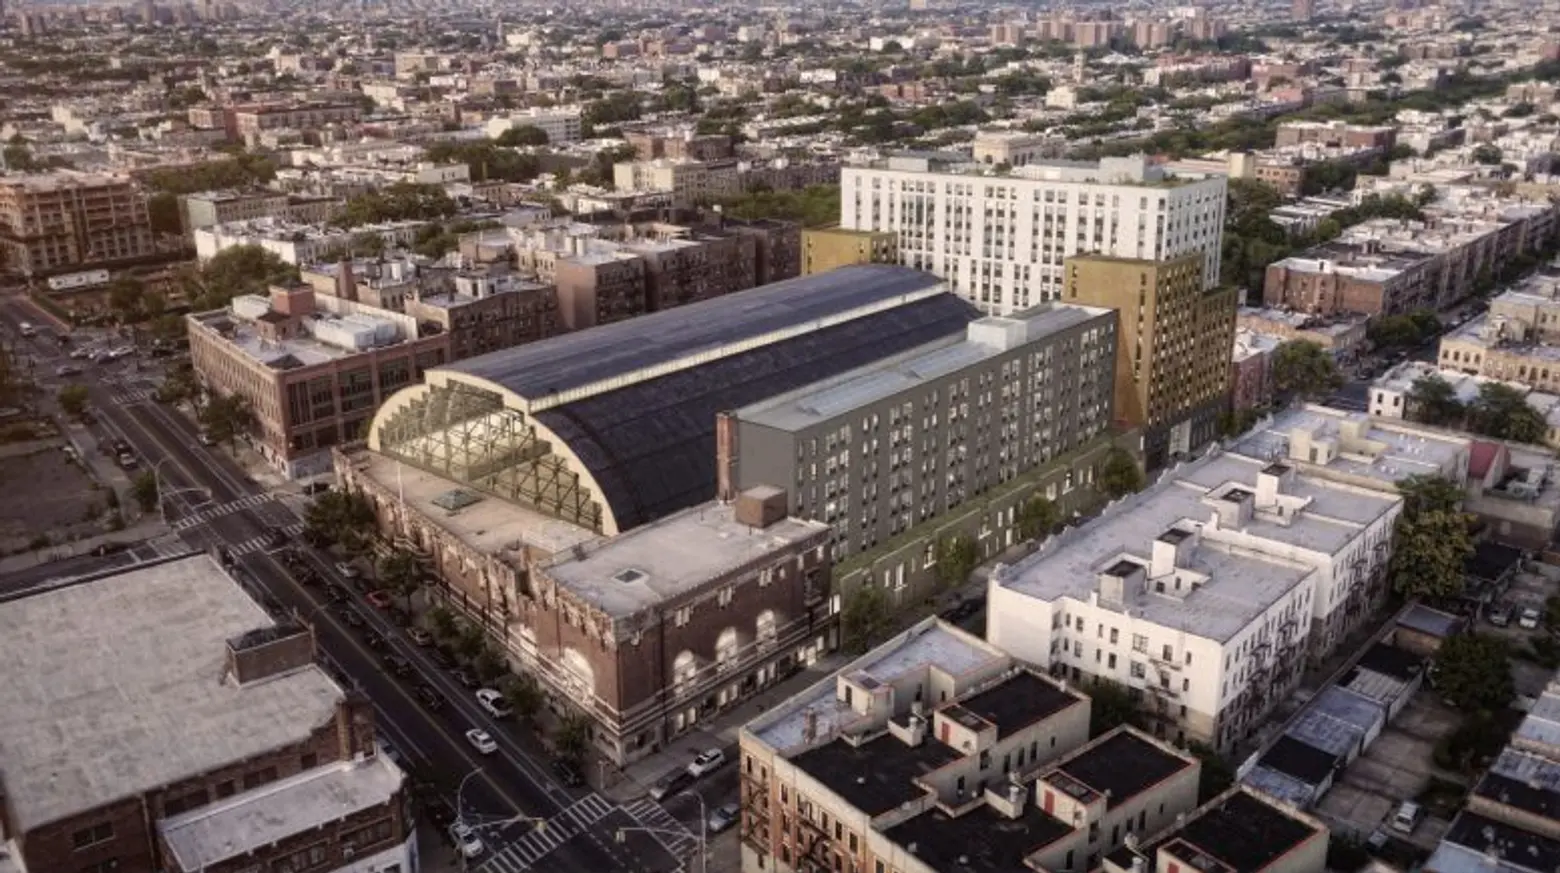 Cuomo gives $15M for community center at Bedford-Union Armory; Planning sessions start for Brooklyn Bridge Park’s public pool